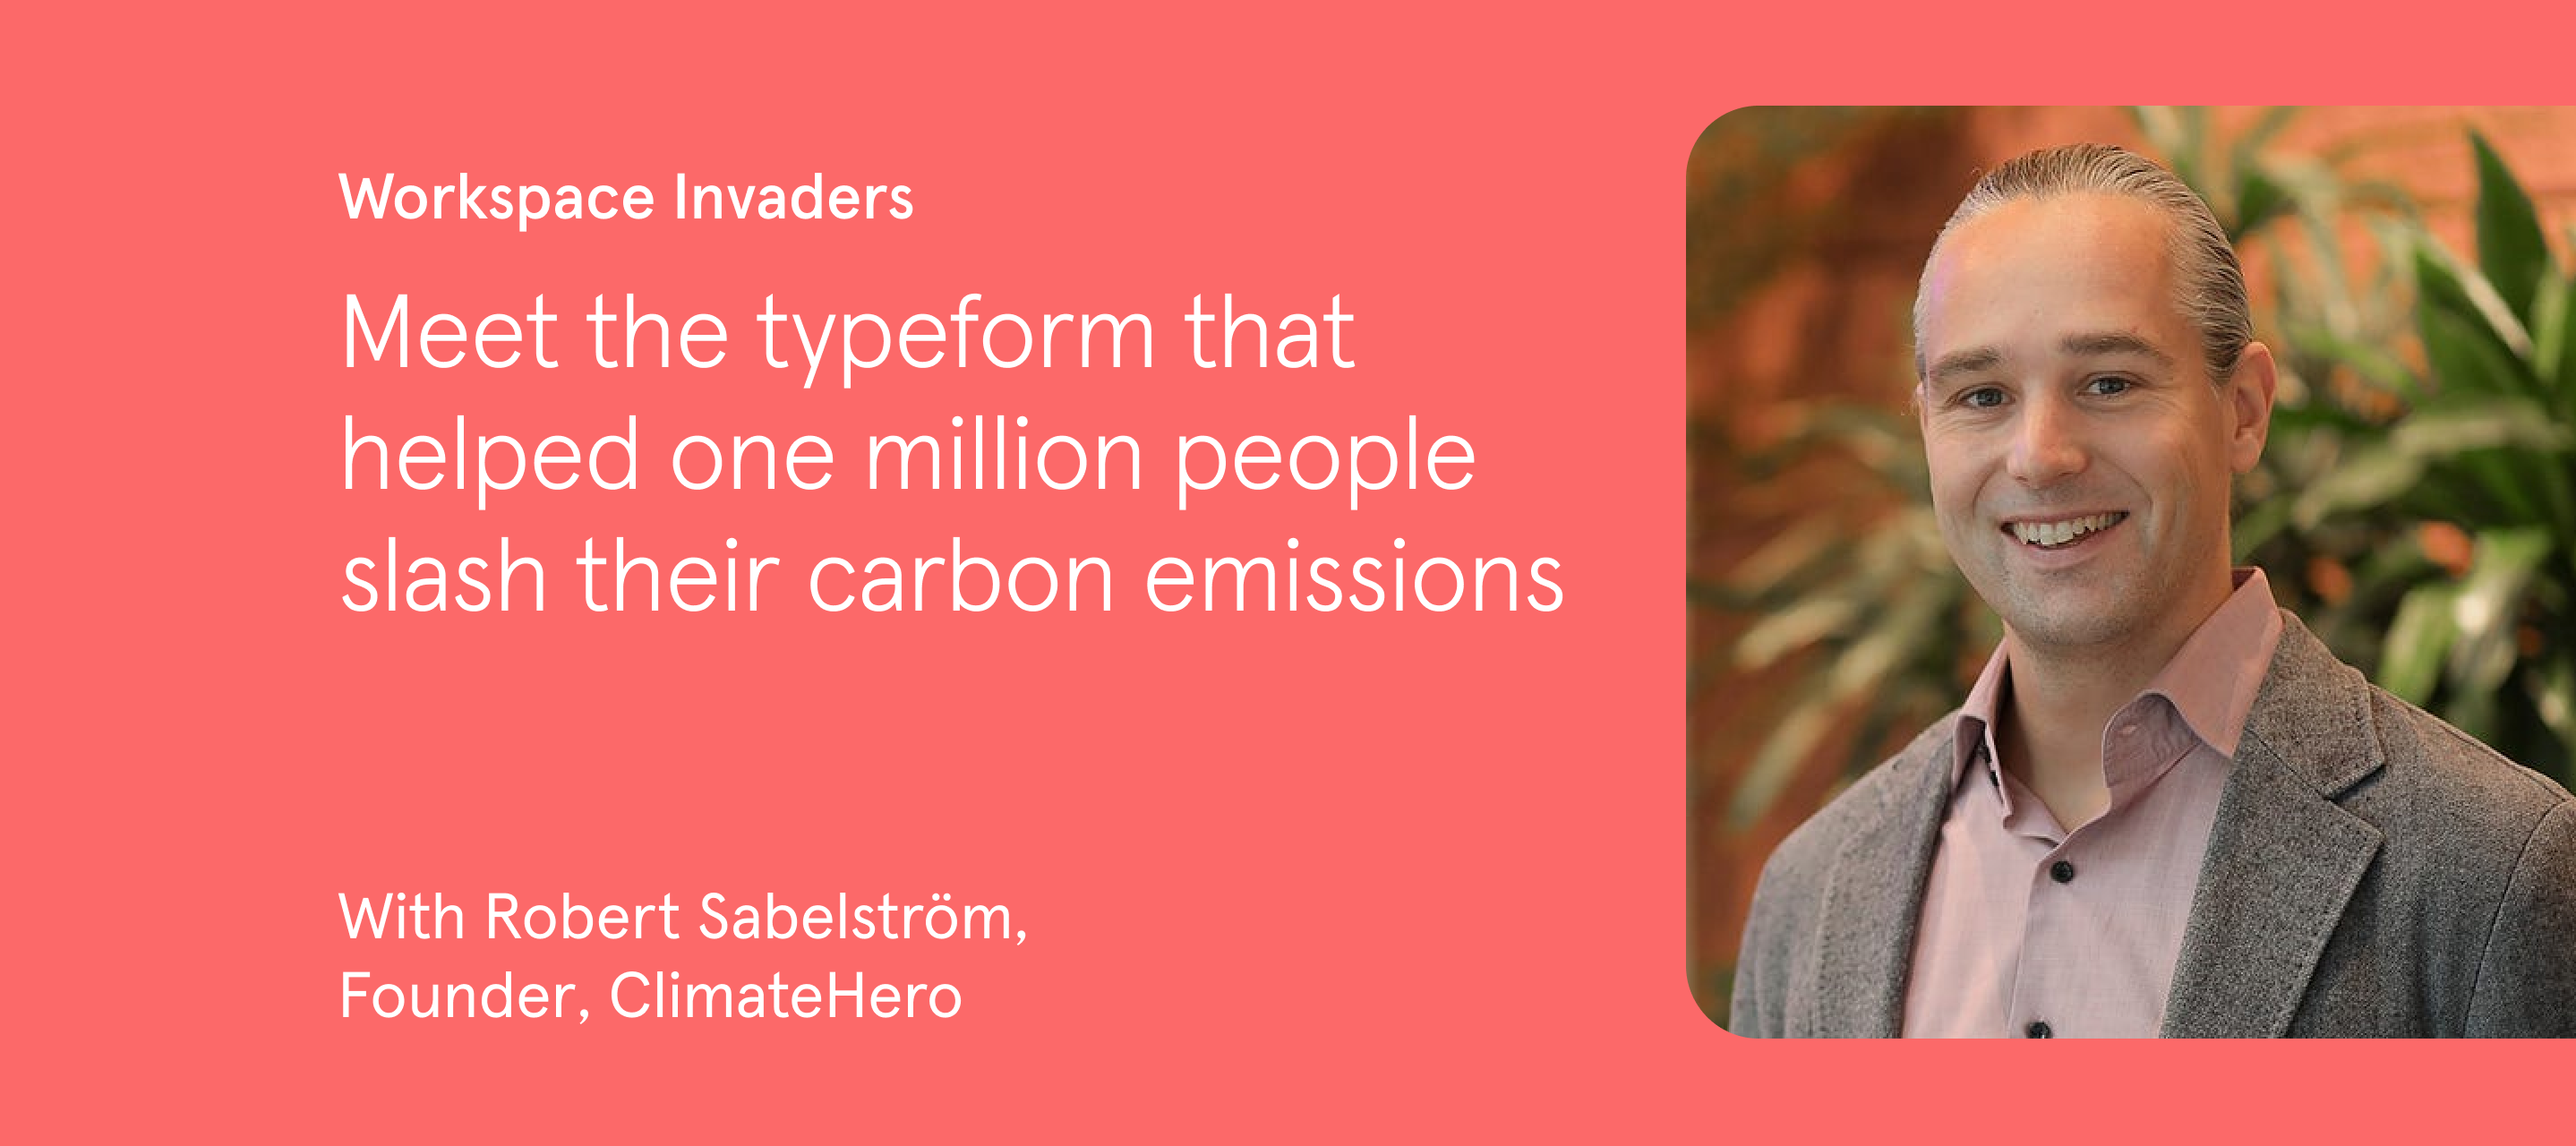 Workspace Invaders: Meet the planet-saving typeform that's helped one million people cut their emissions 🌍